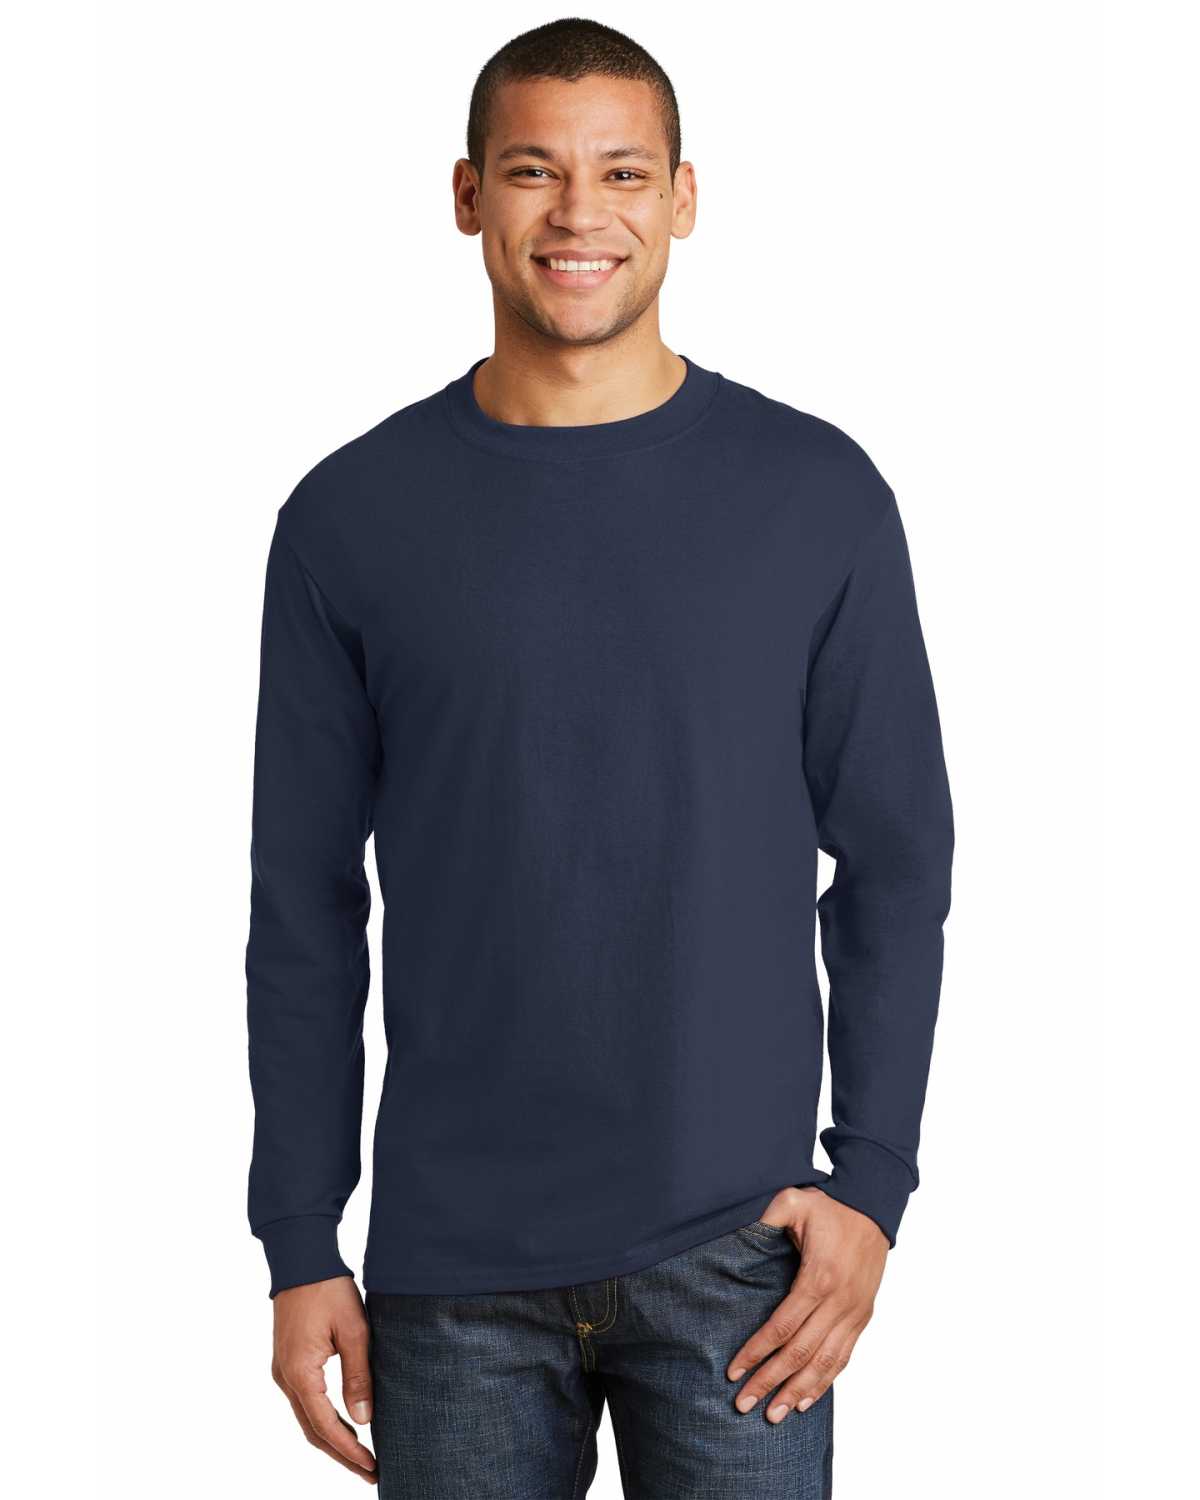 Hanes 5186 Beefy-T 100% Cotton Long Sleeve T-Shirt on discount ...